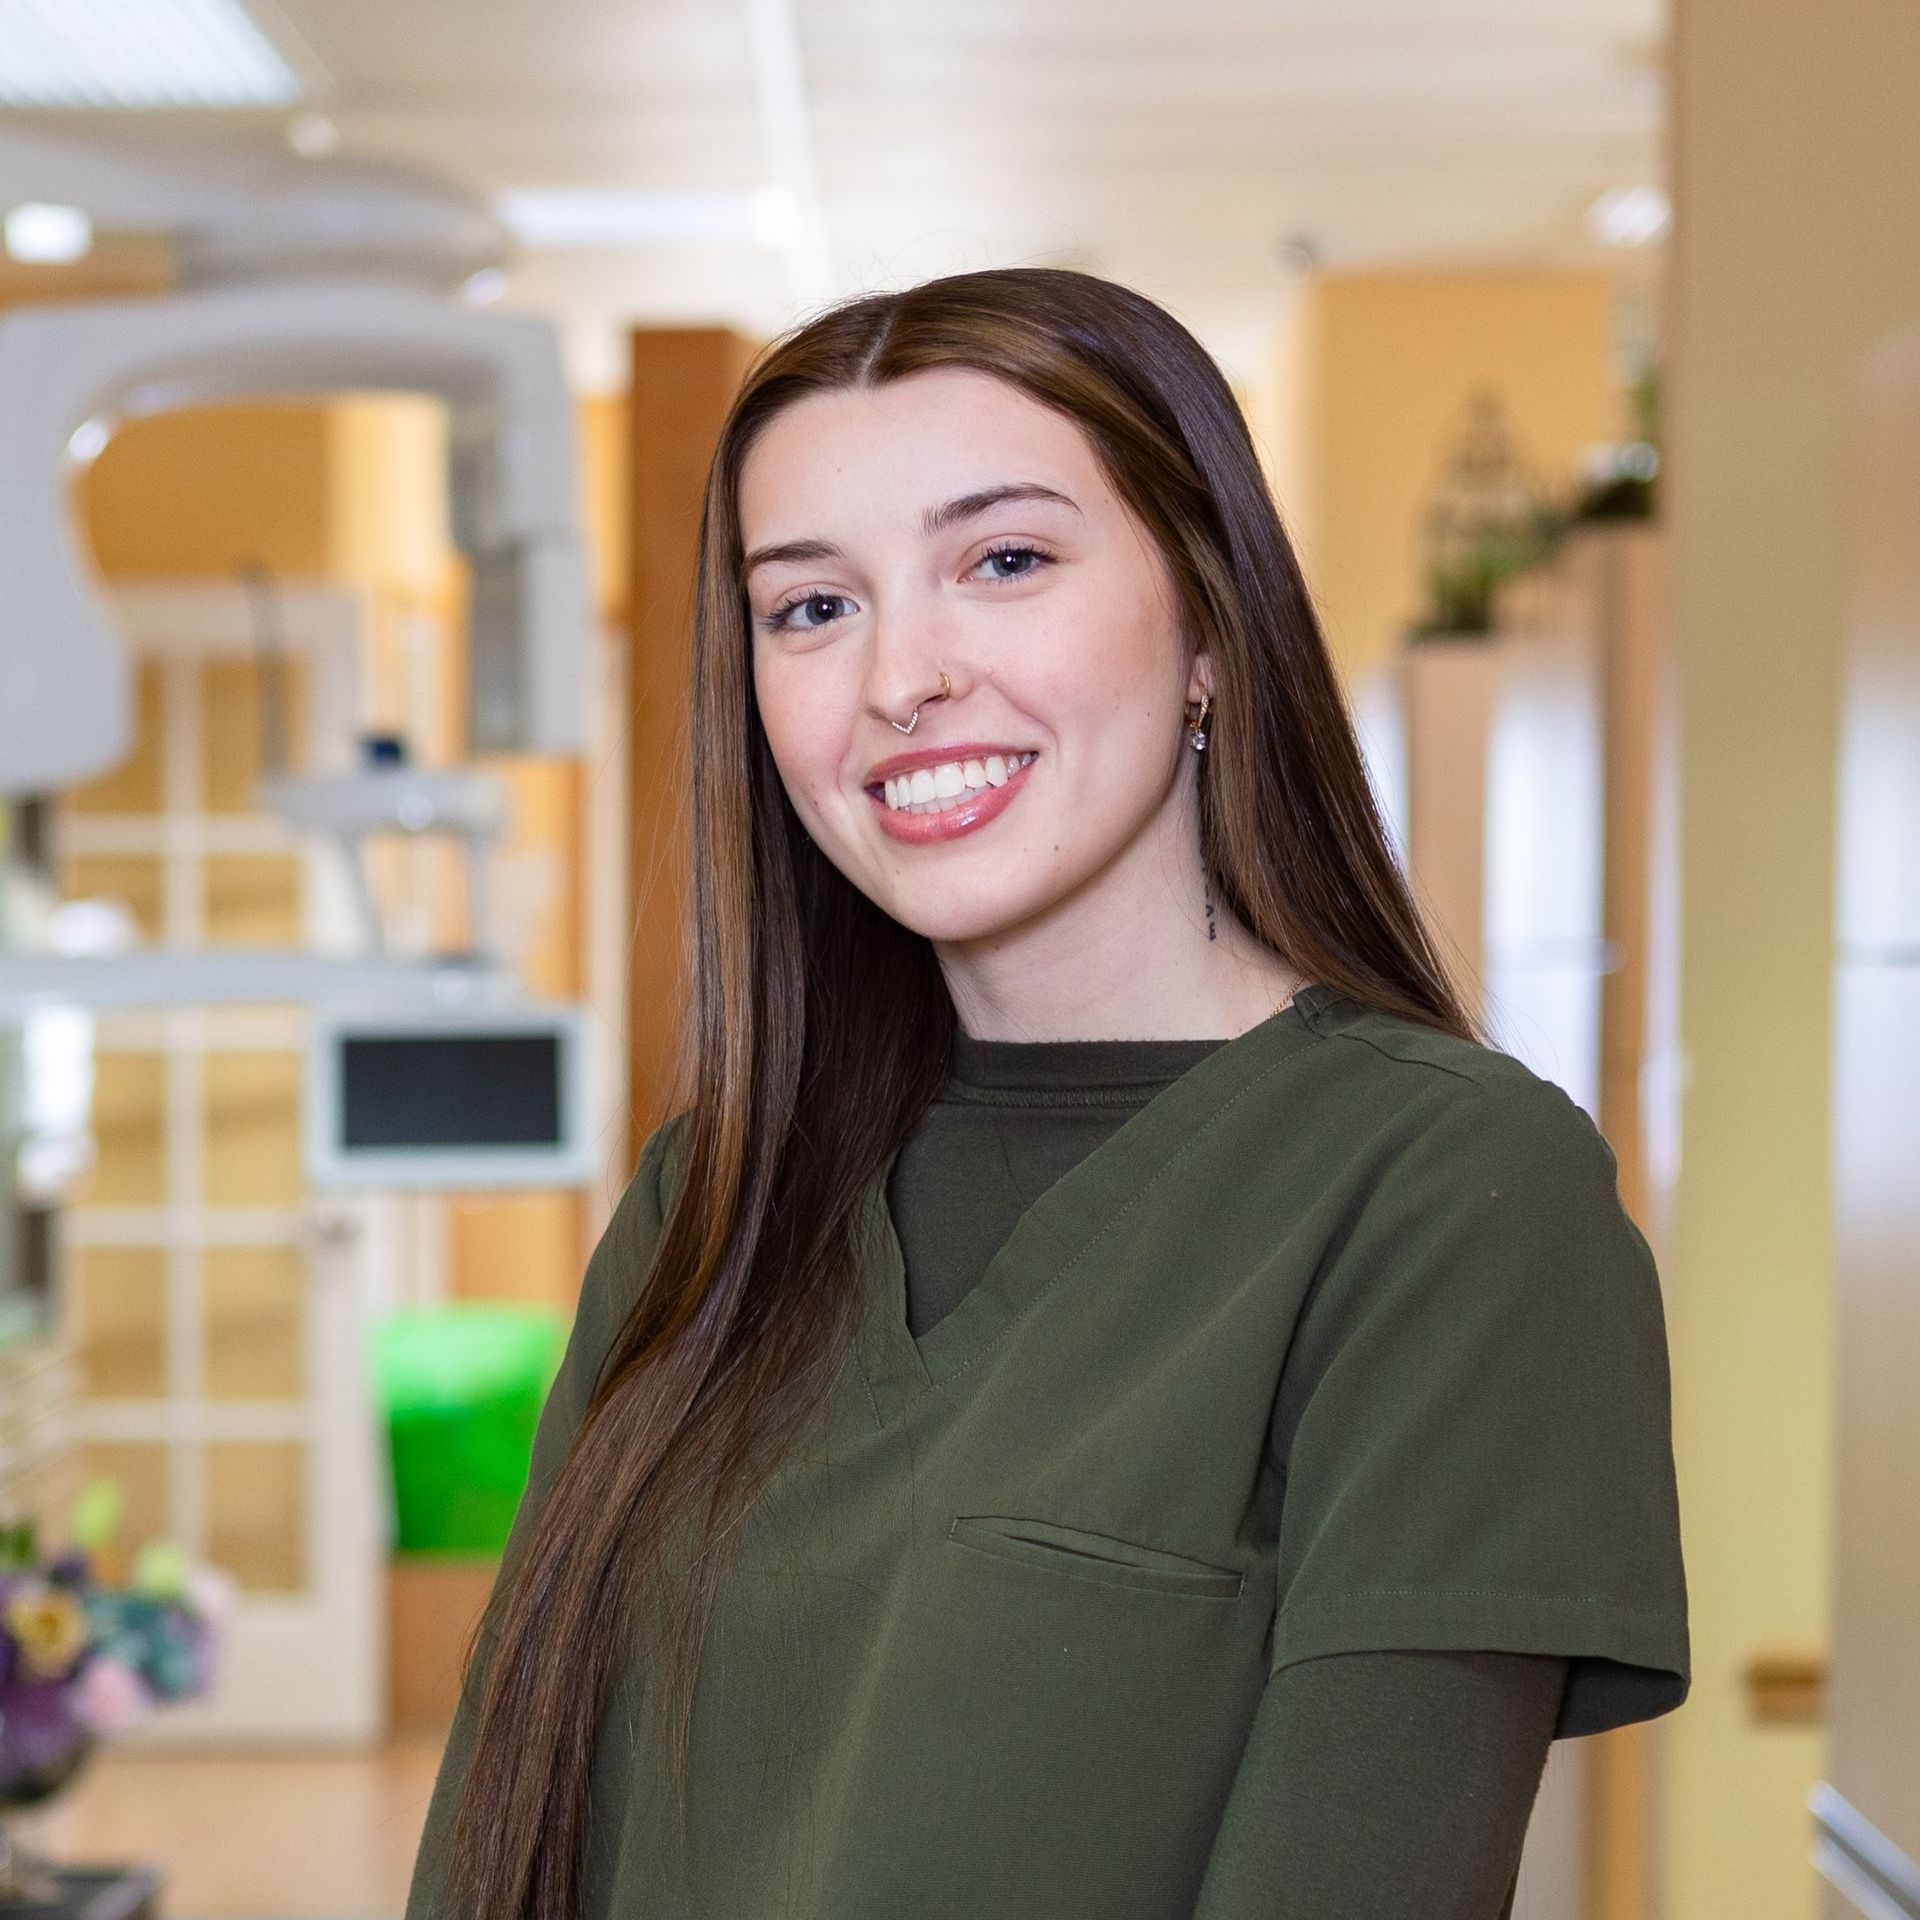 A woman in a green scrub top is smiling in a dental office.